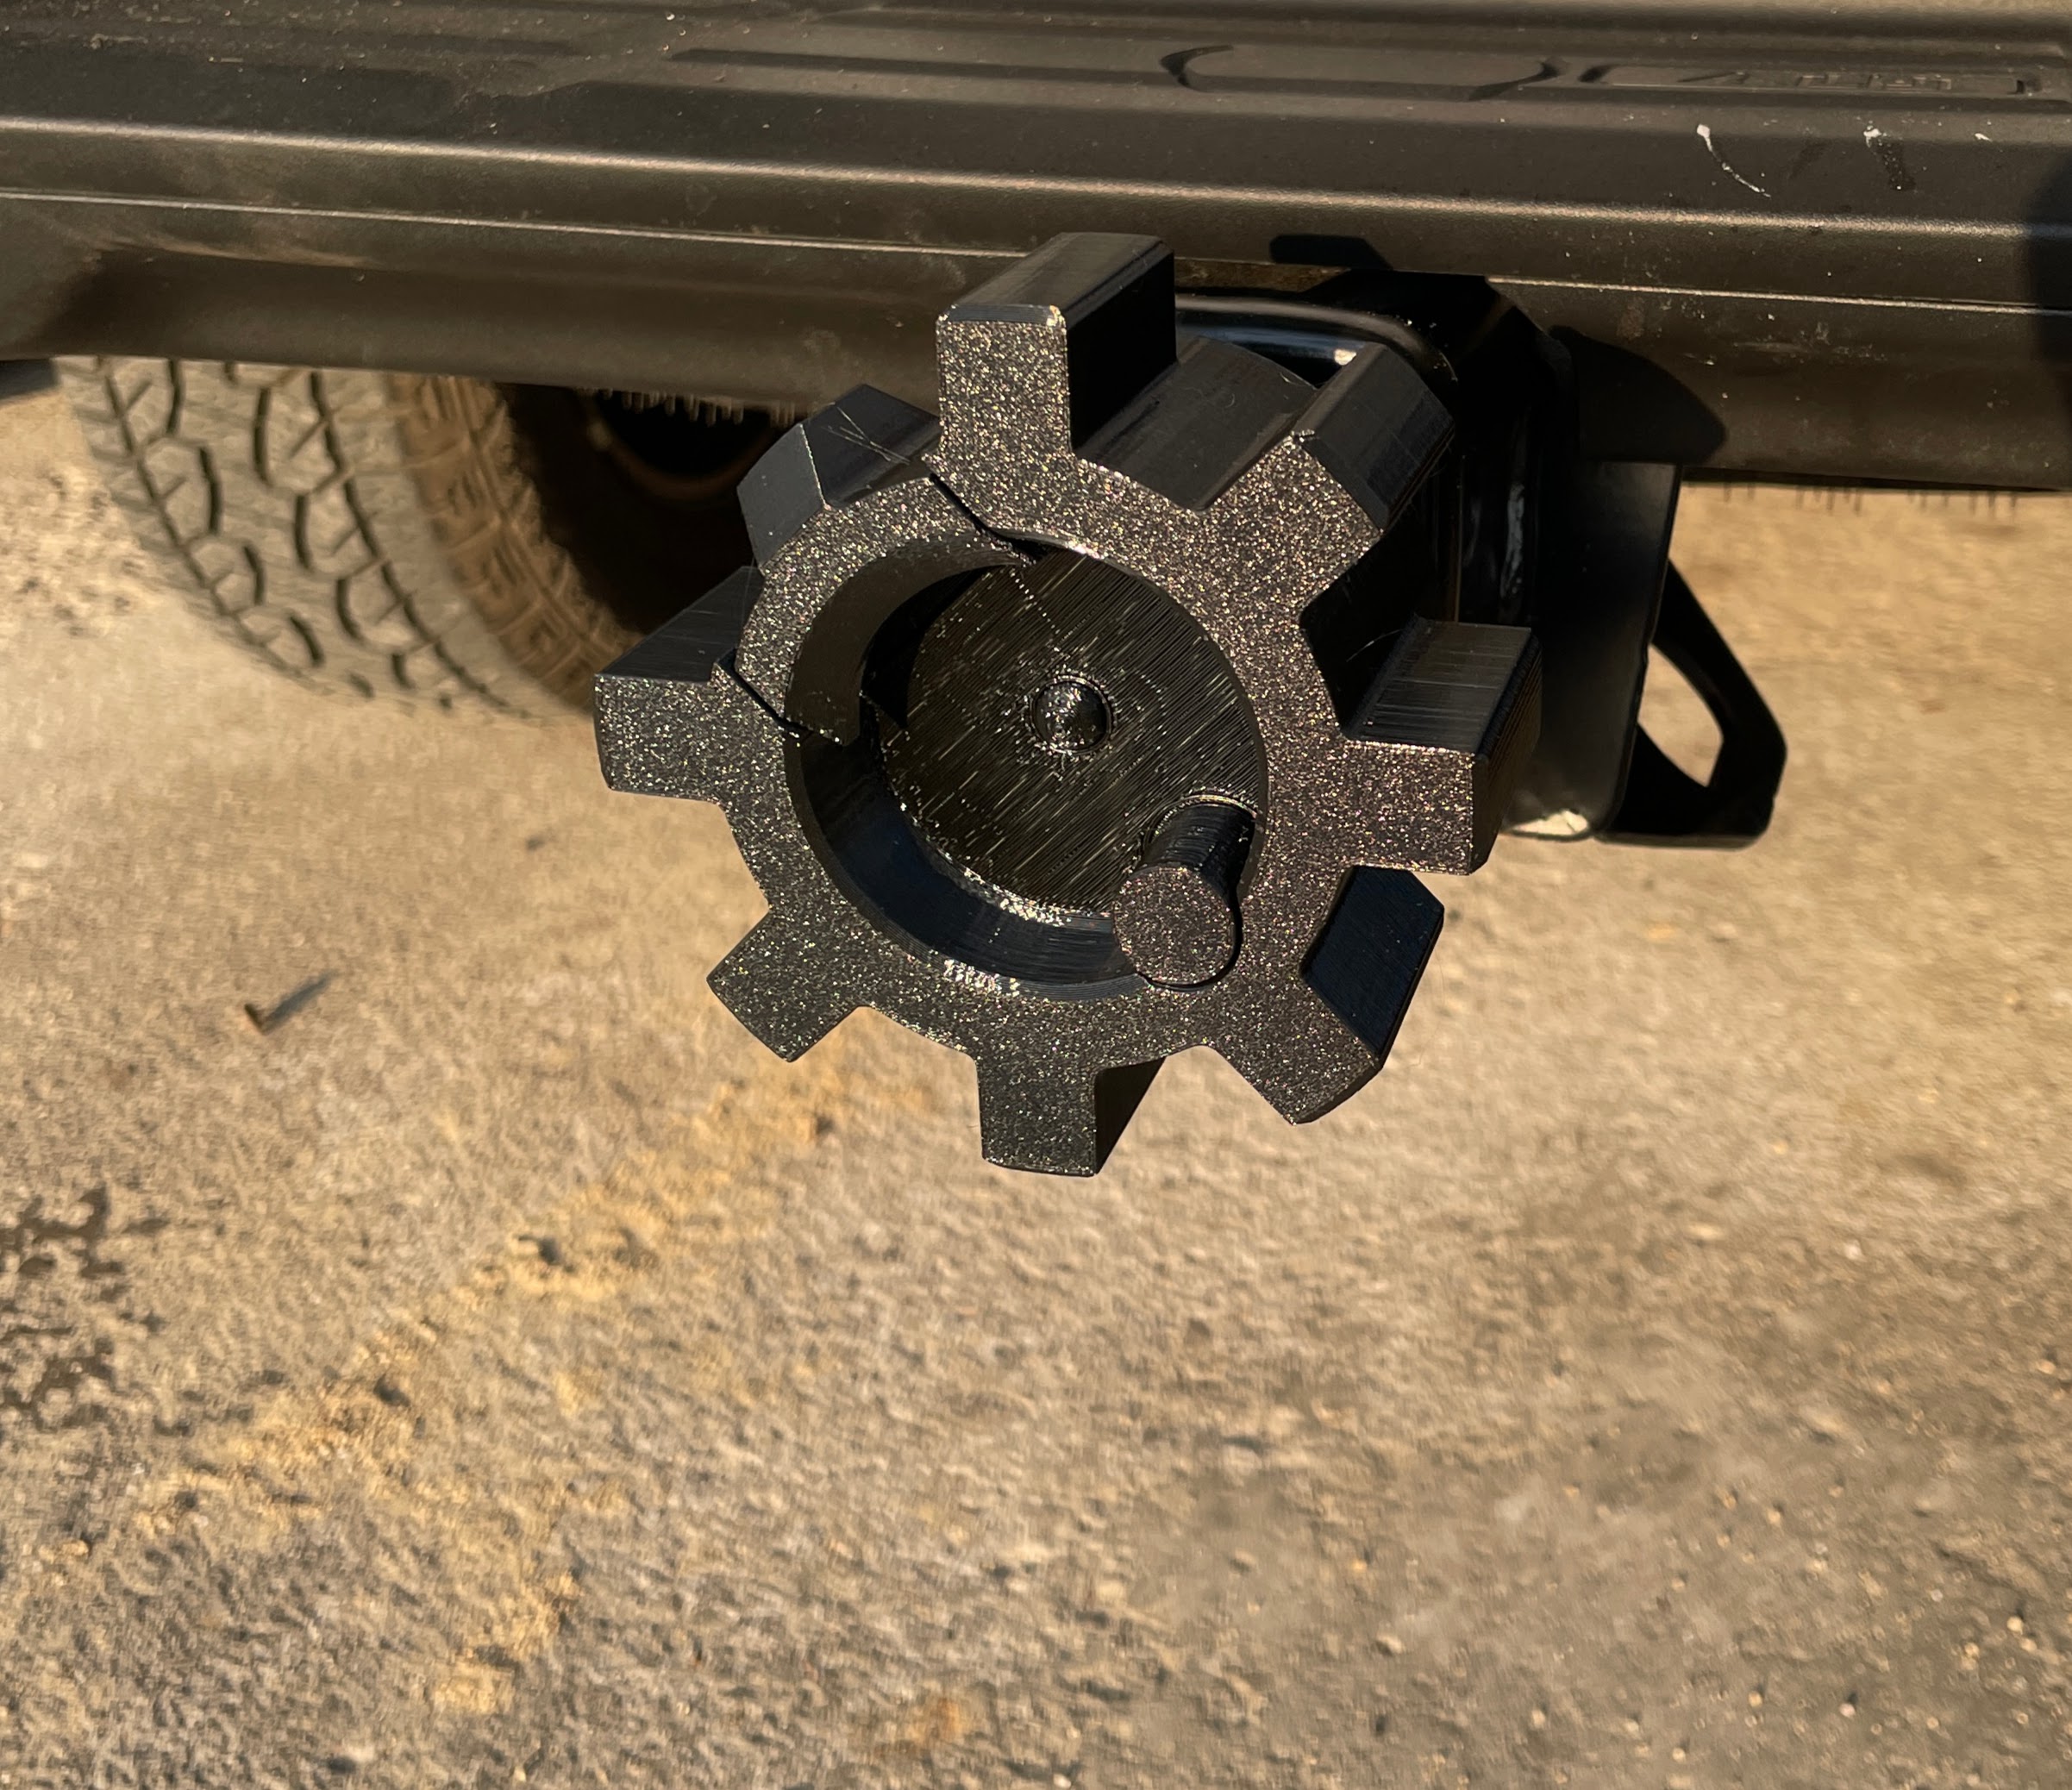 Print in place AR15 trailer hitch cover press fit